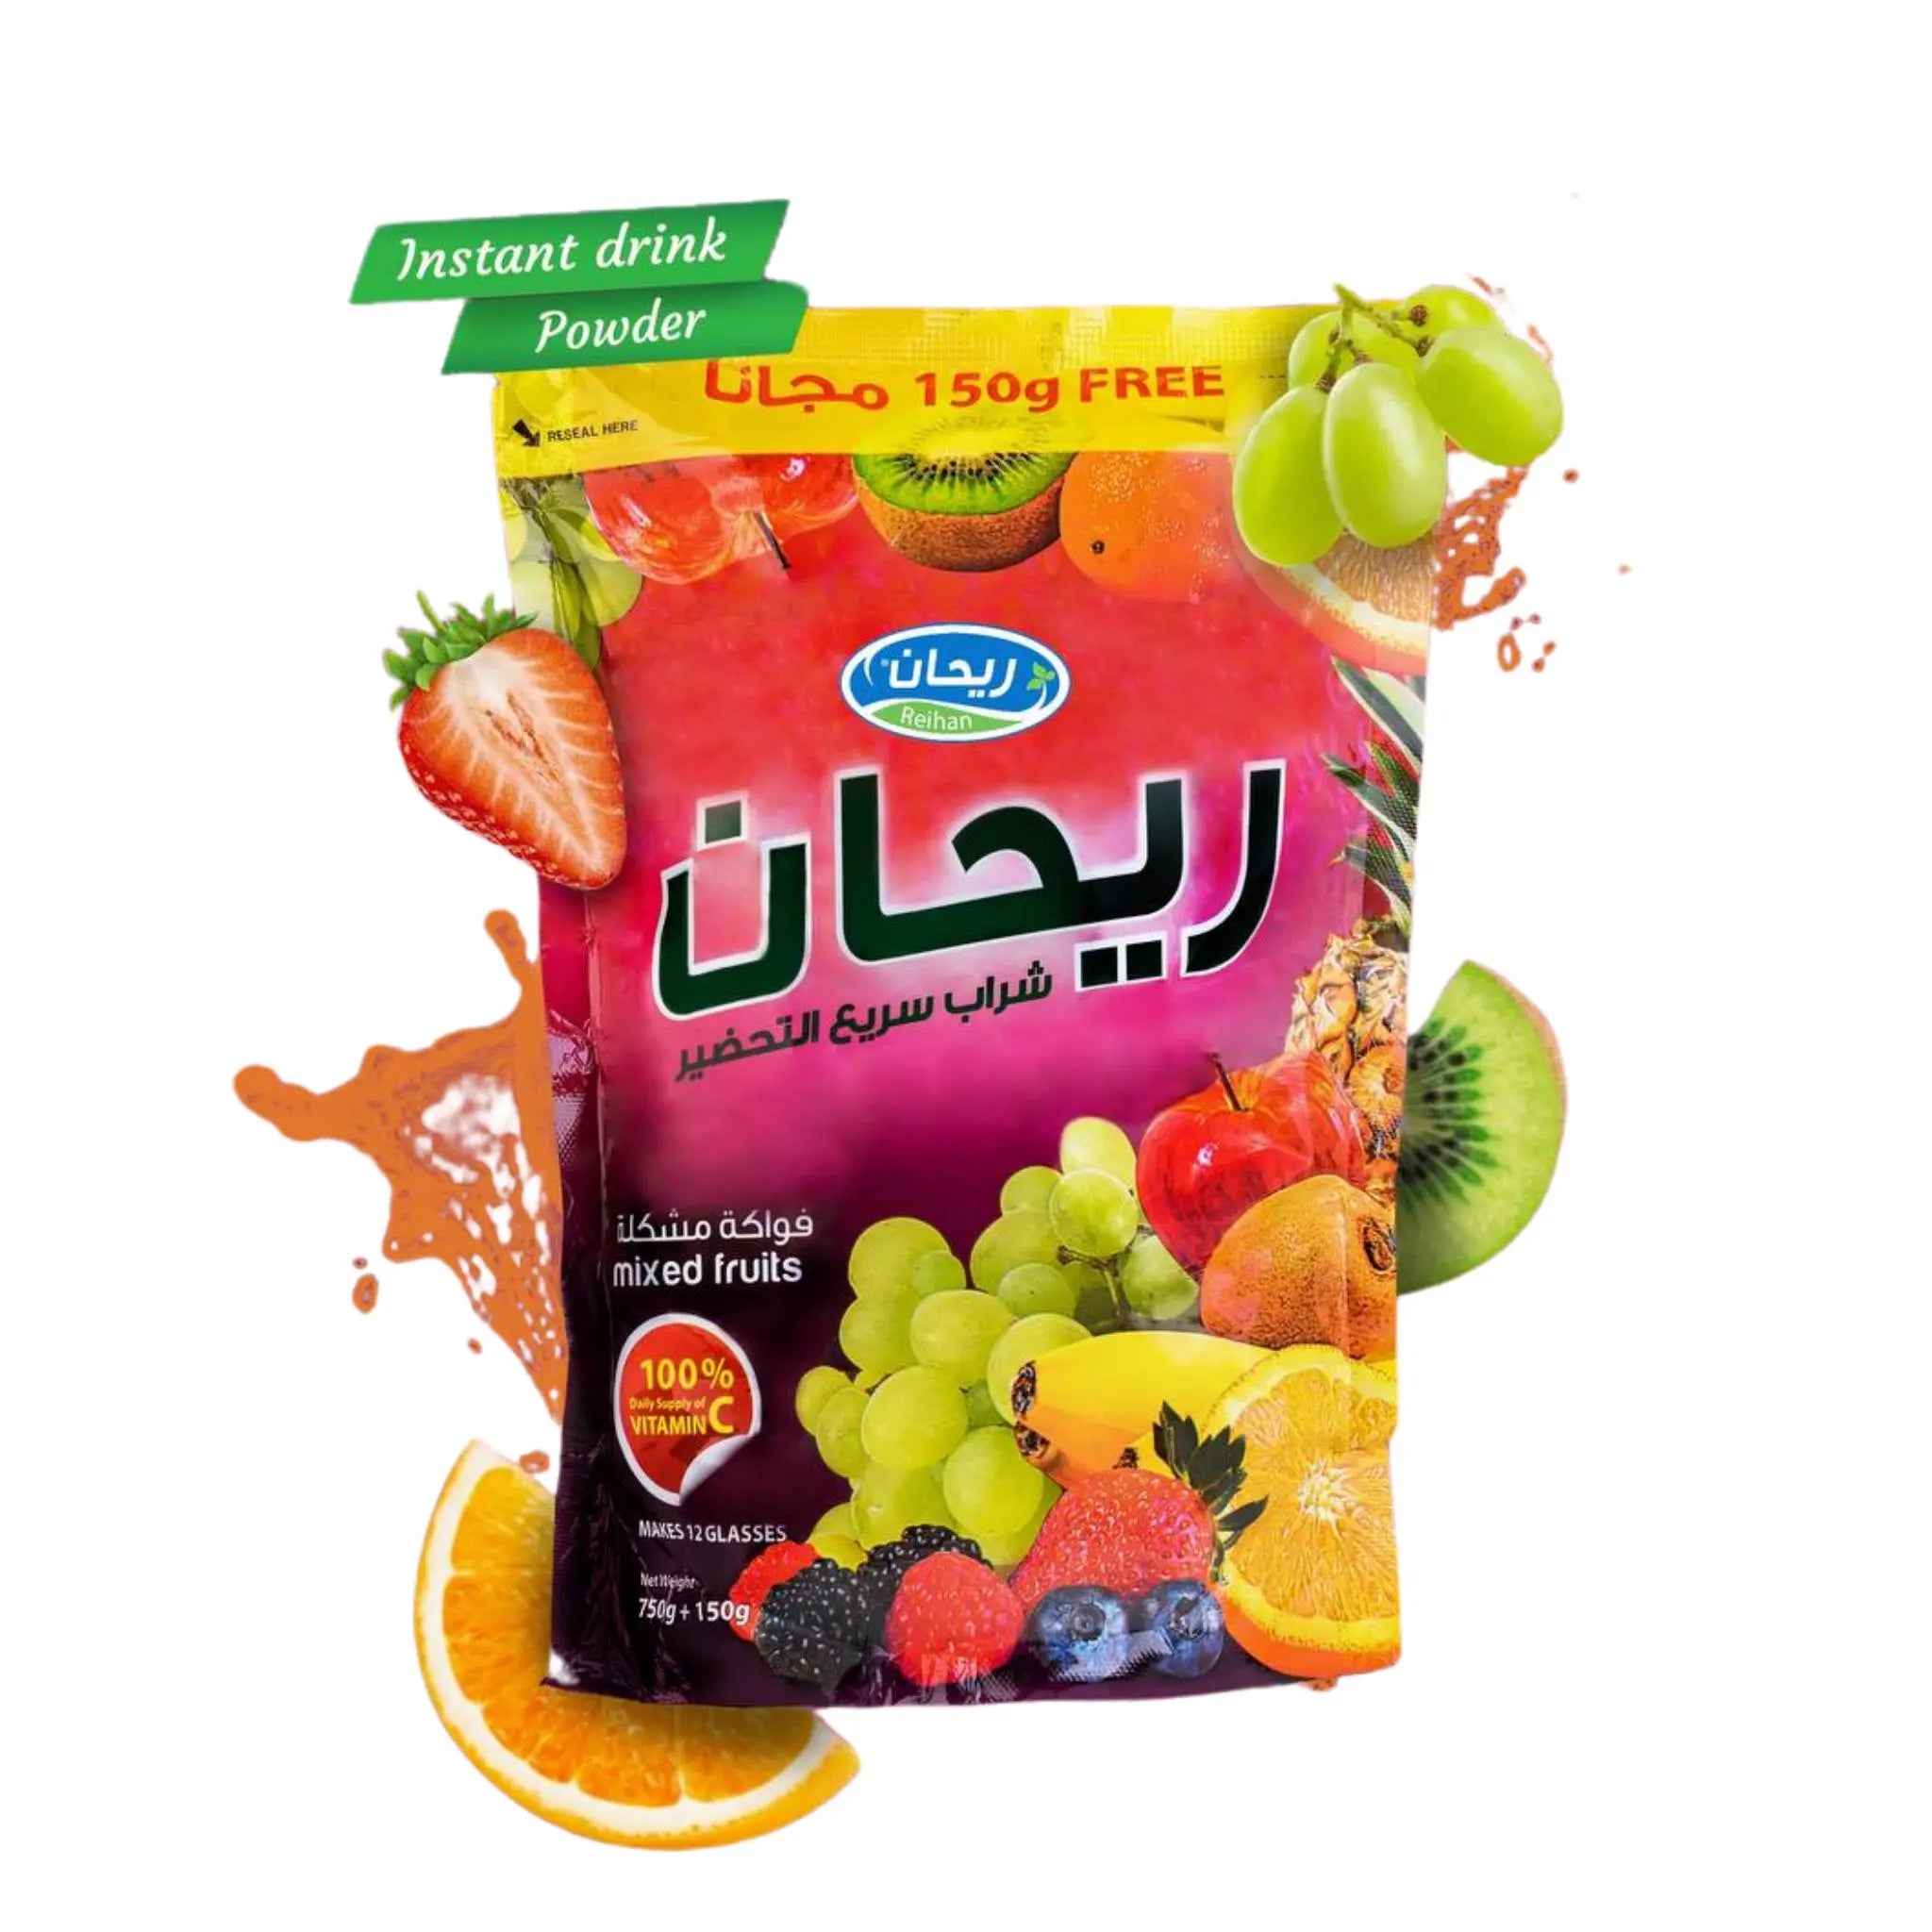 REIHAN INSTANT DRINK MIXED FRUIT FLAVOUR 900G [POUCH] - Pack of 5 Marino.AE